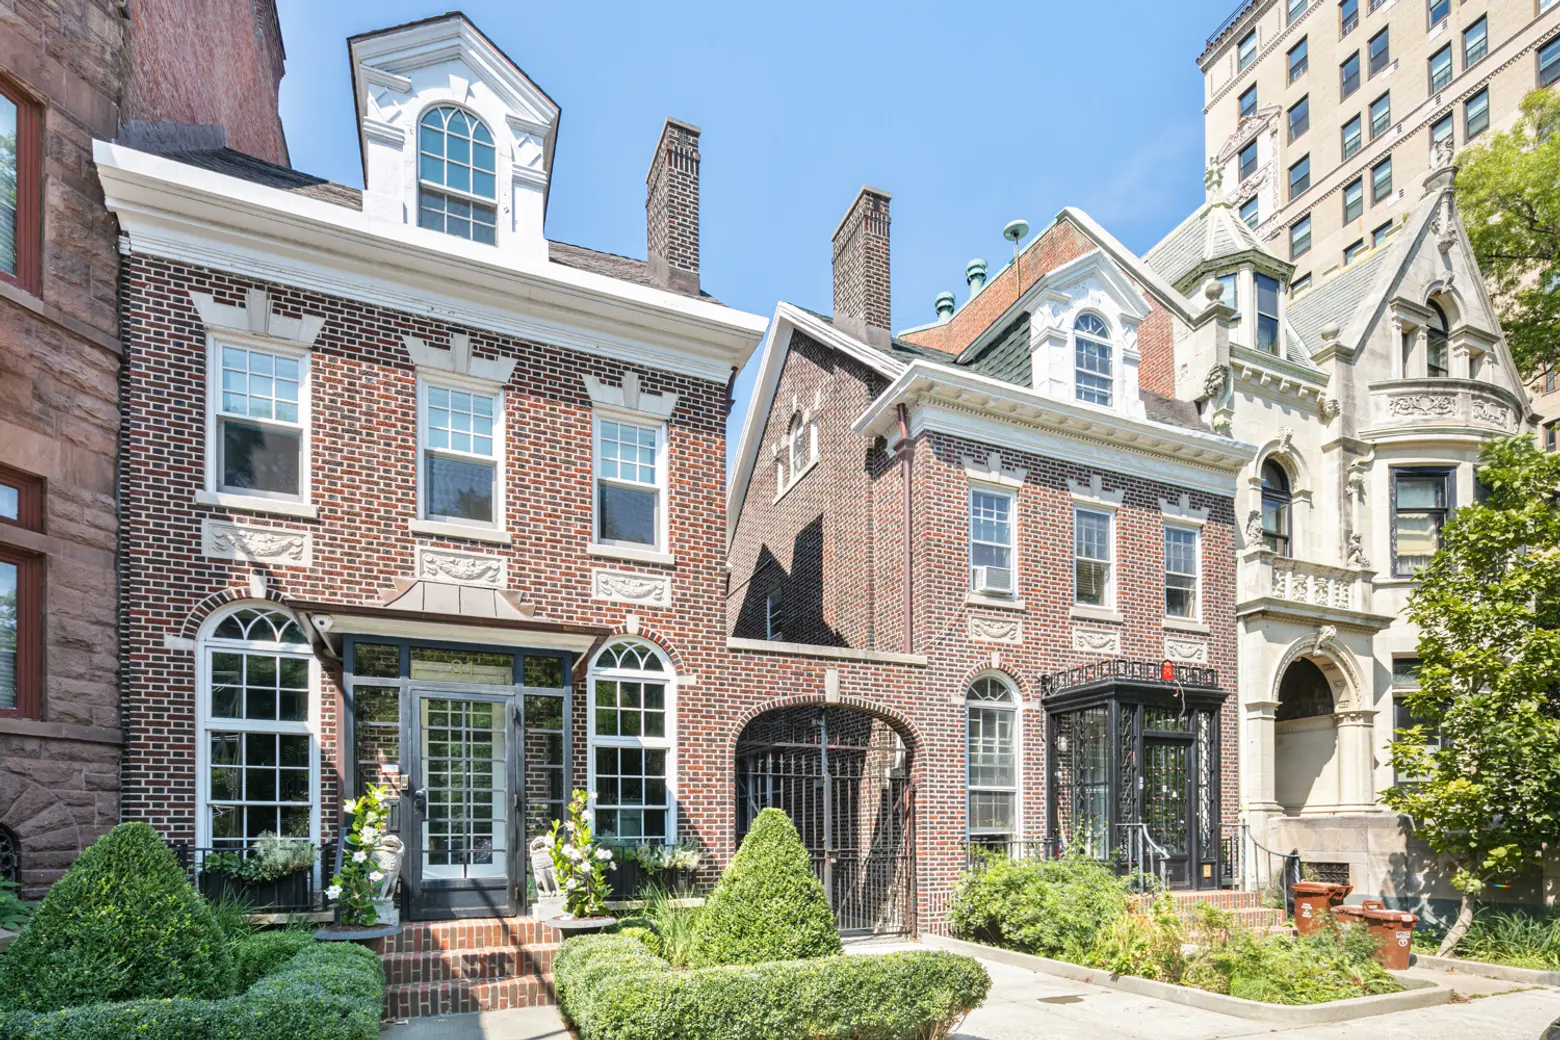 $5.9M townhouse on Prospect Park comes fully loaded with a garage, gym, sauna, & so much more